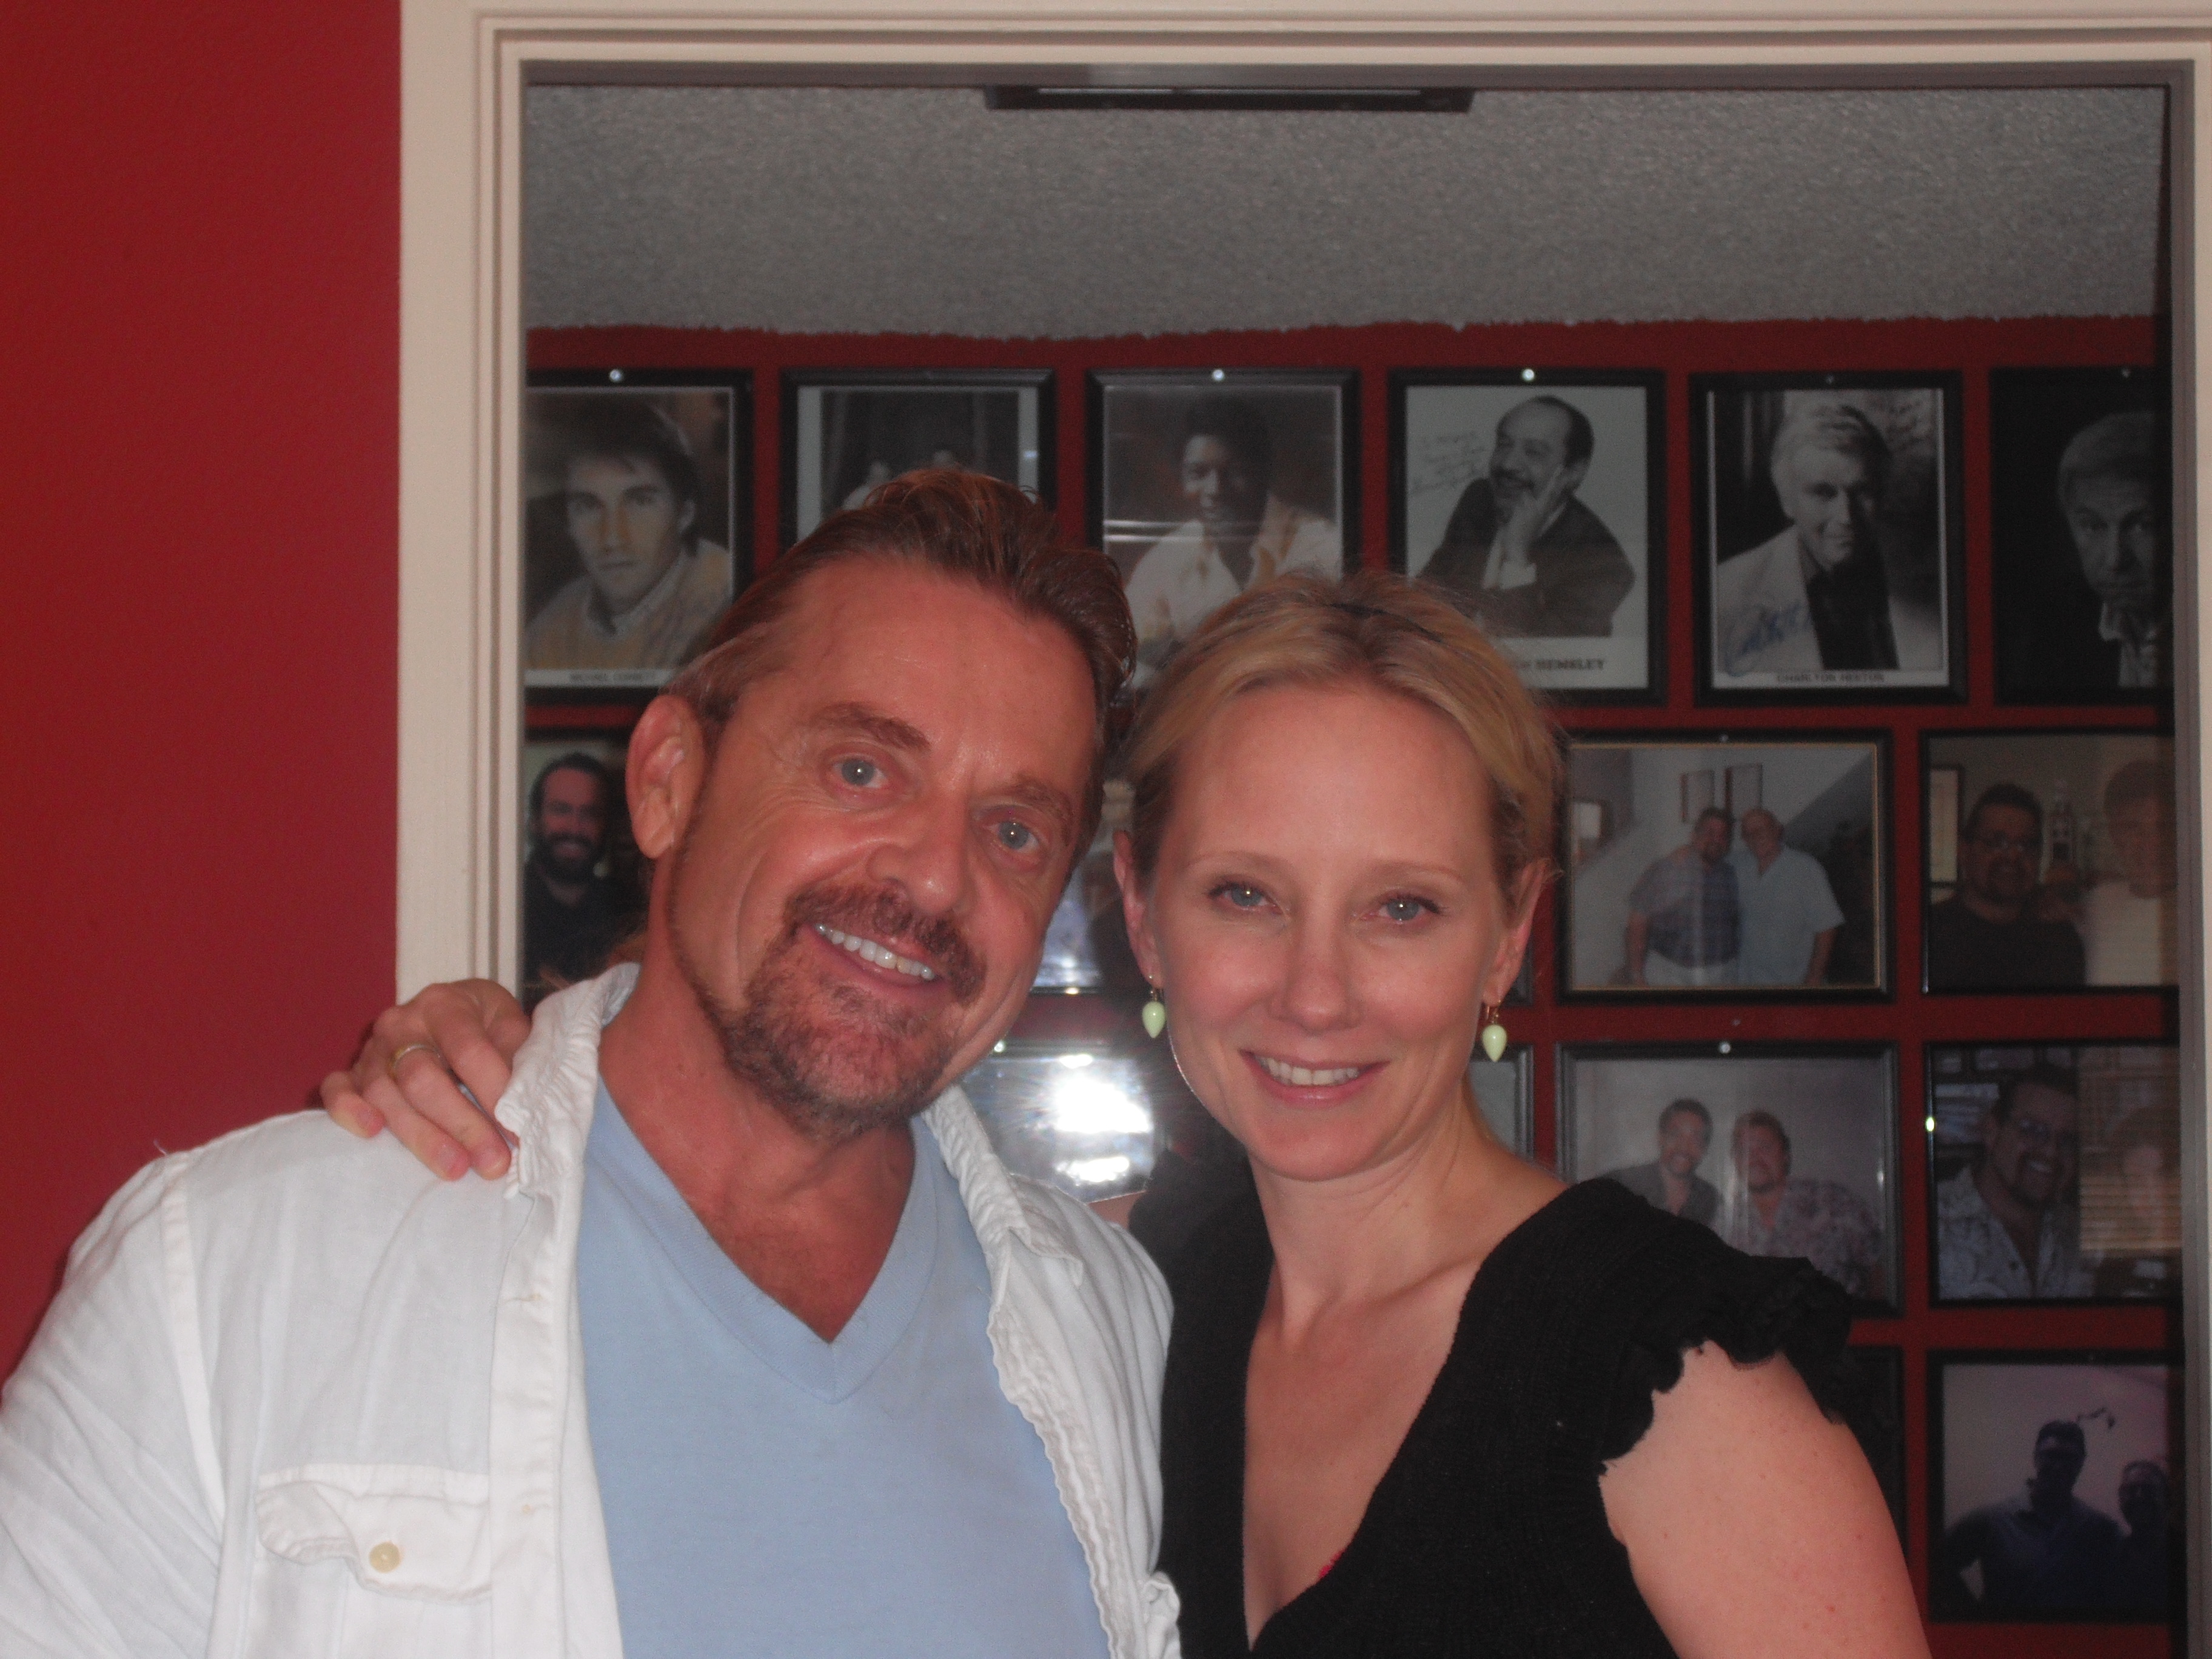 Marc with the lovely Ann Heche after a VO session